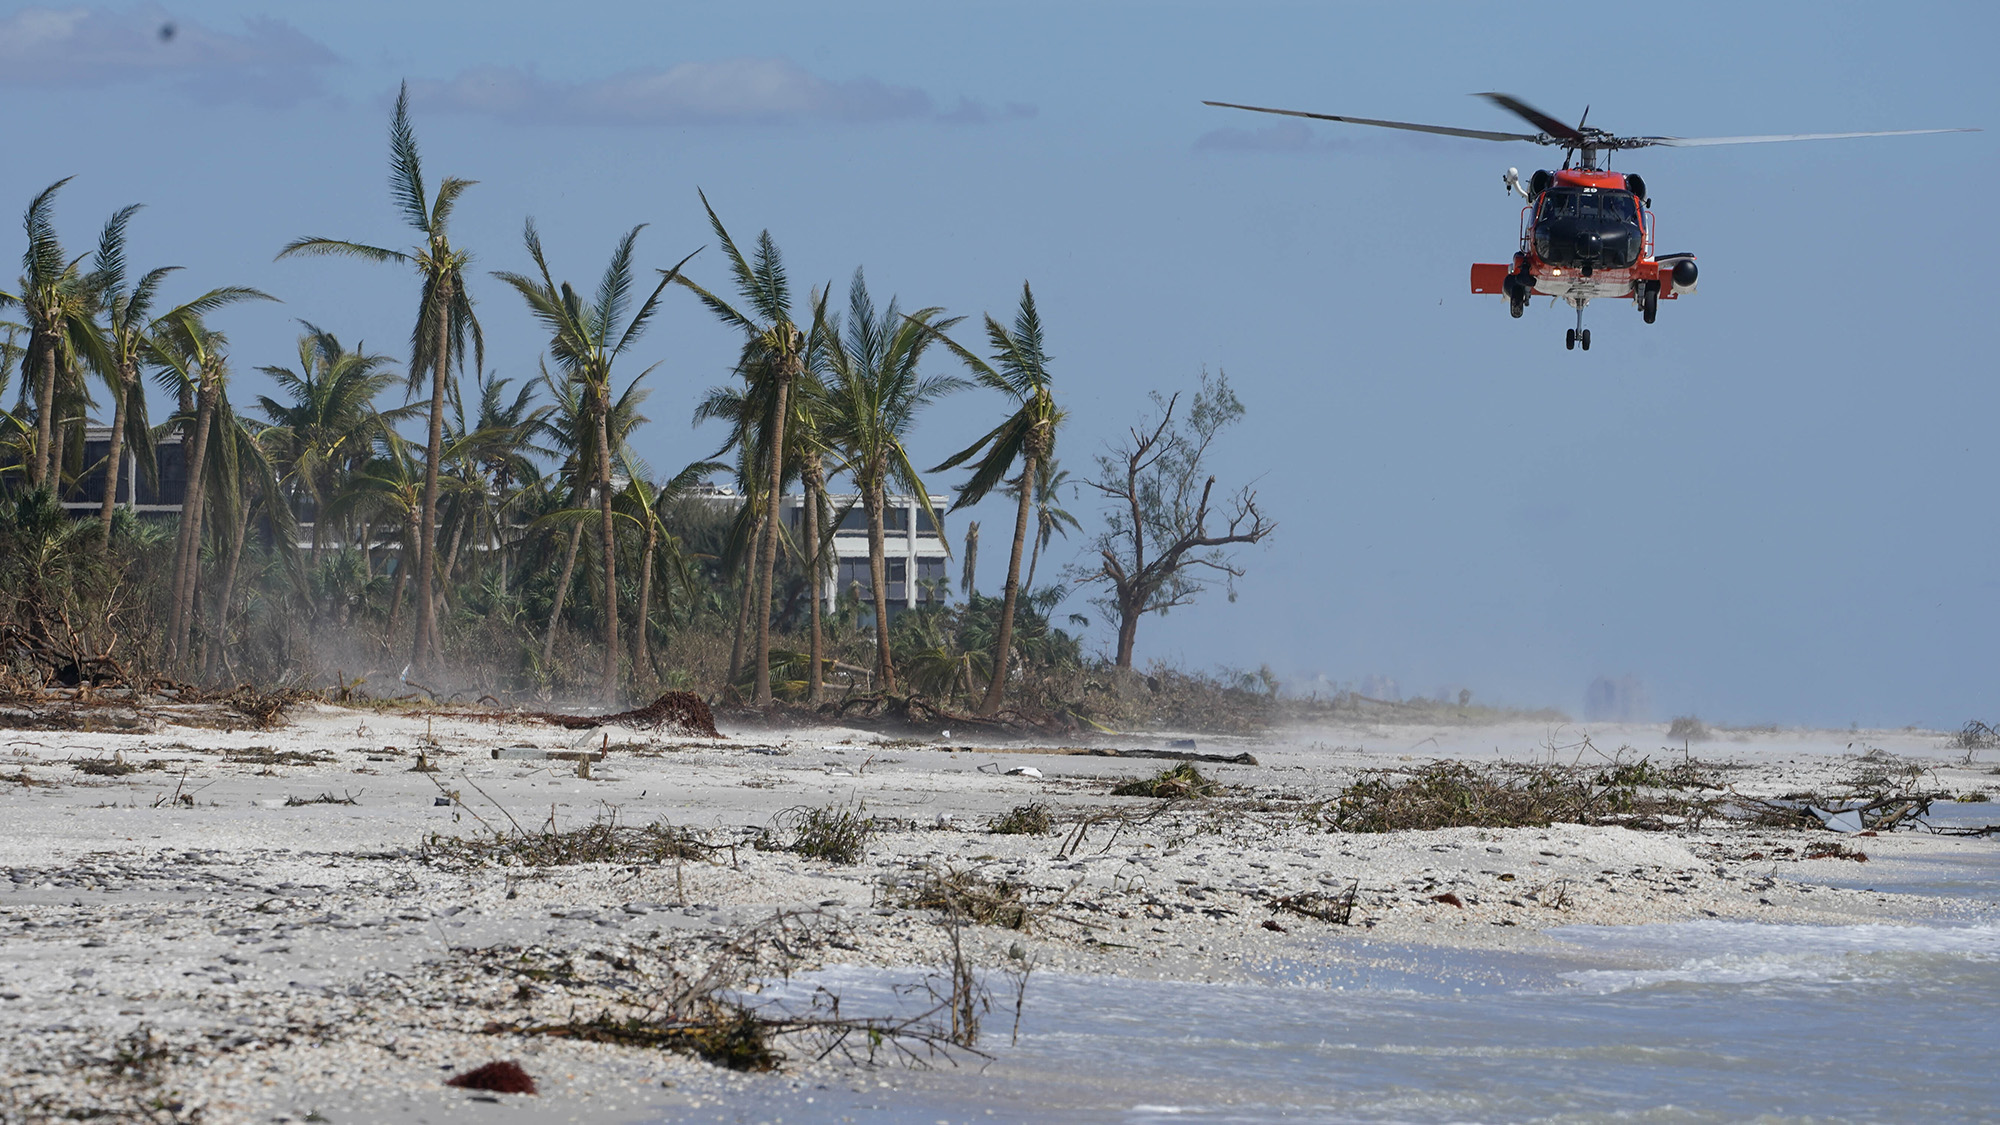 A U.S. Coast Guard helicopter prepares to land on a beach to ferry people off Sanibel Island, Florida, on Friday, September 30.